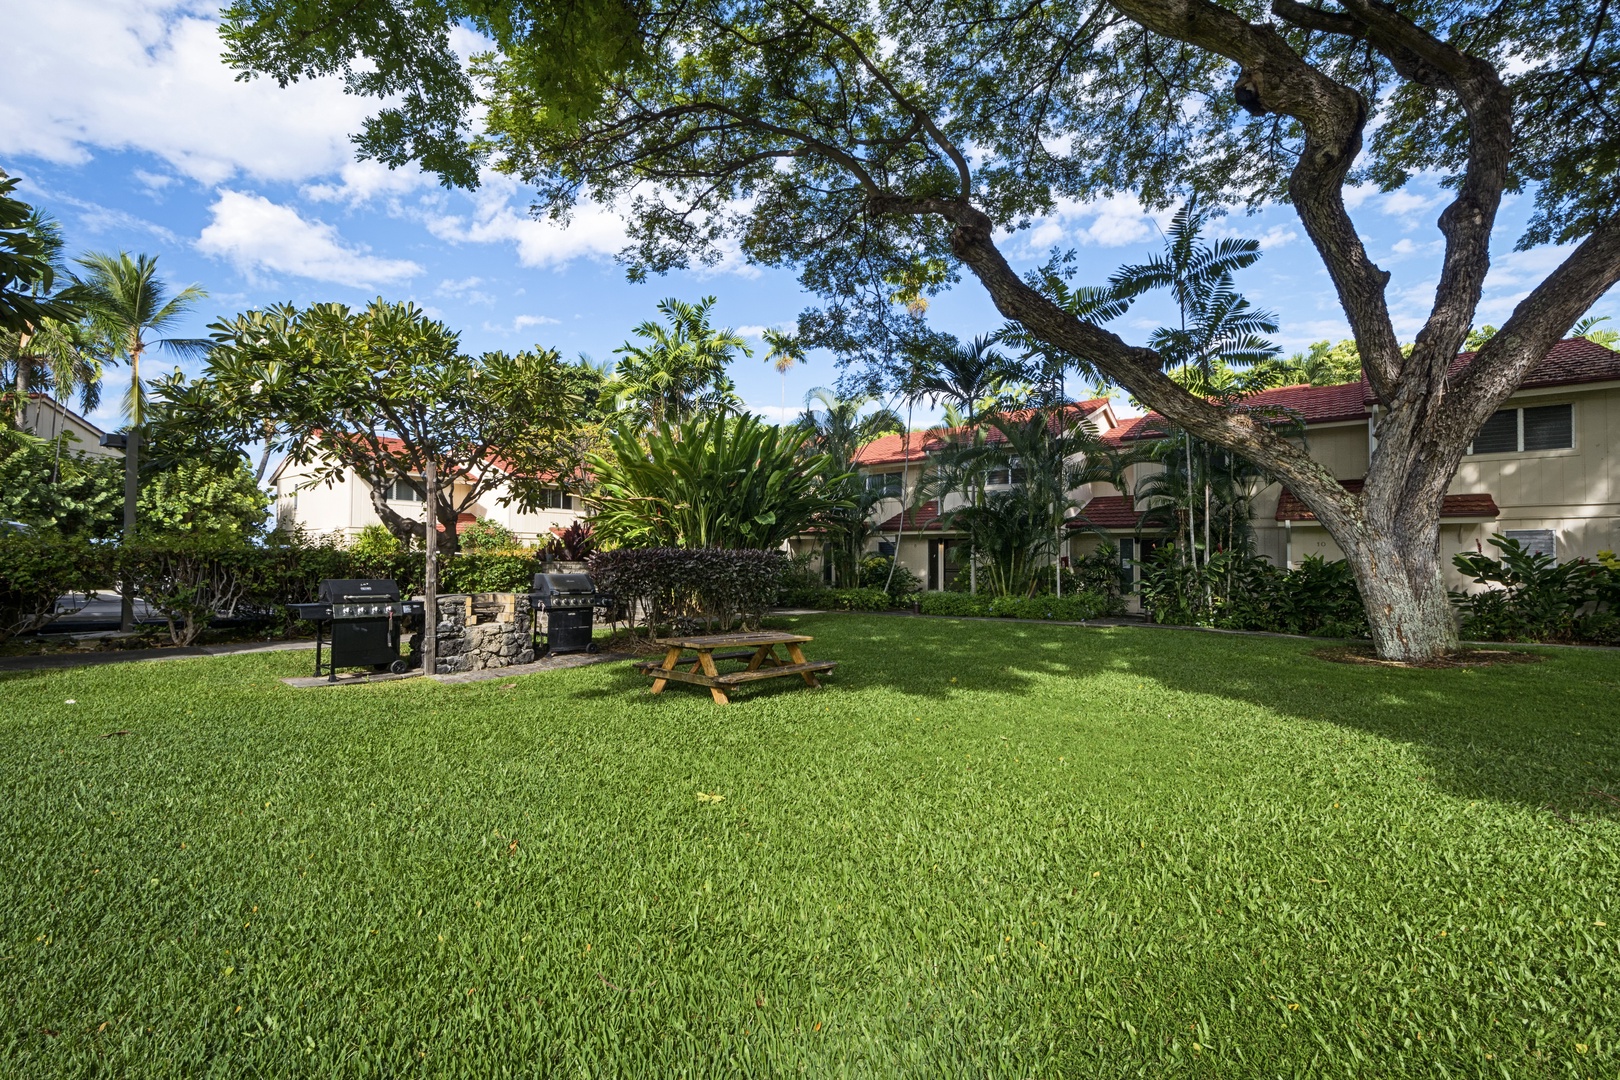 Kailua Kona Vacation Rentals, Keauhou Kona Surf & Racquet 2101 - Enjoy a serene picnic surrounded by lush greenery in our beautifully manicured grass front.